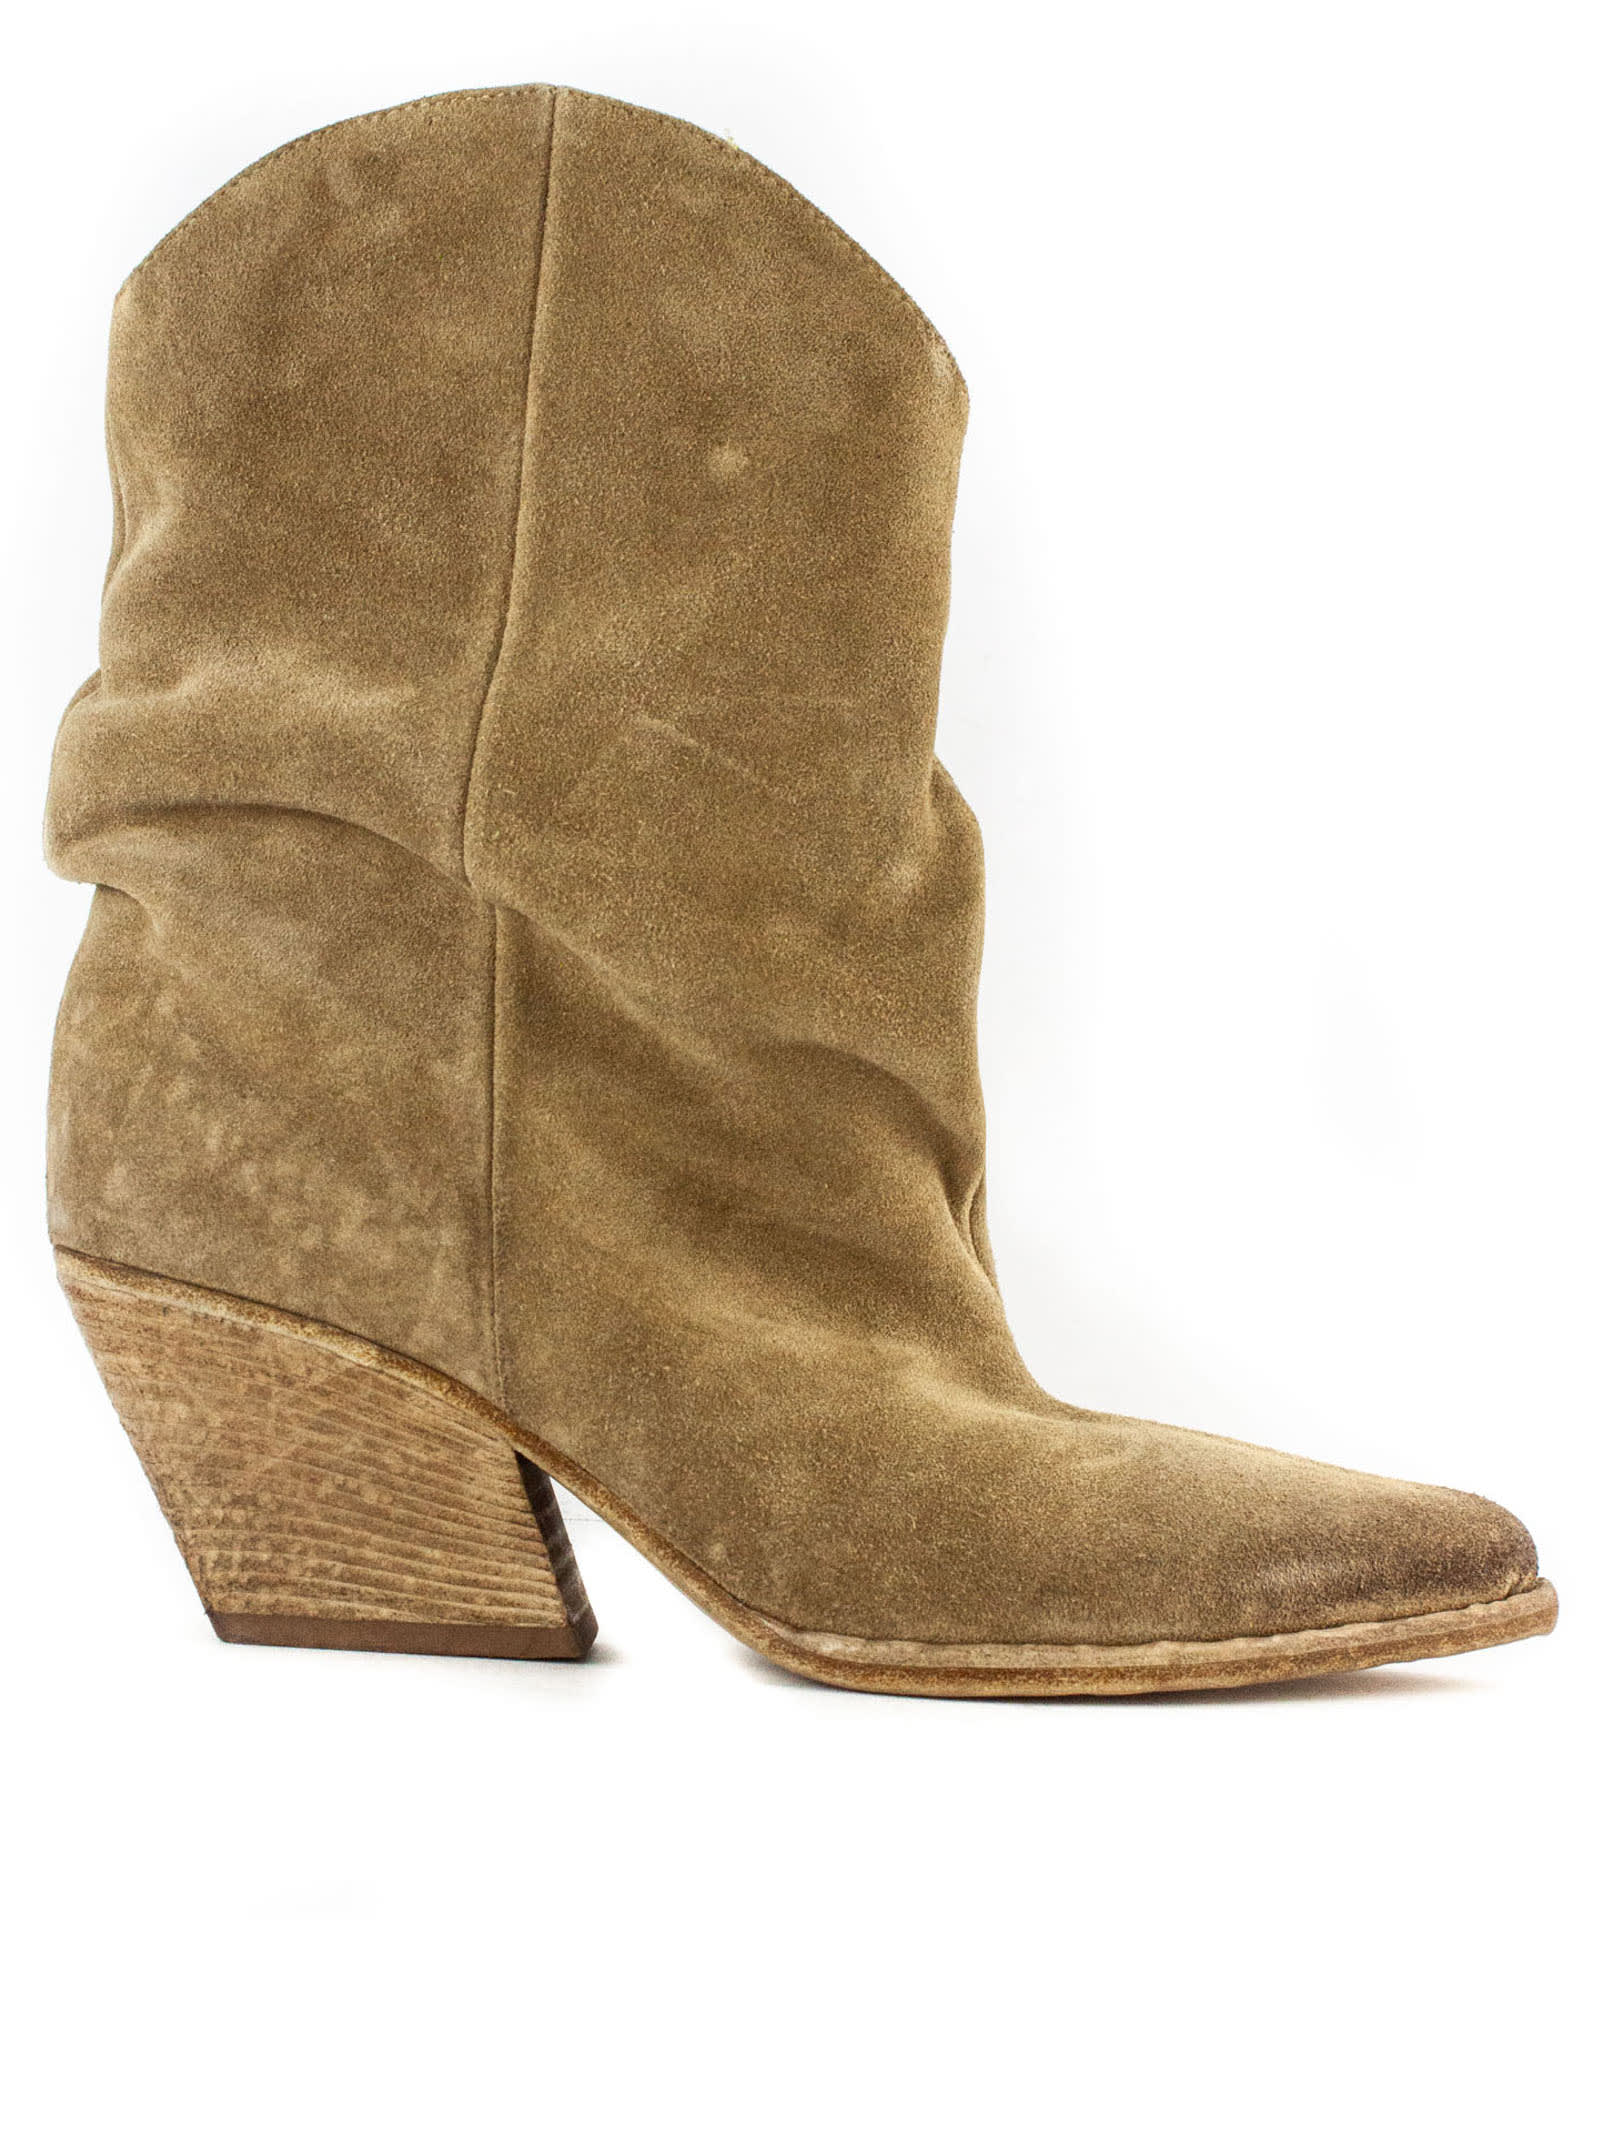 Brown Suede Texan Ankle Boots